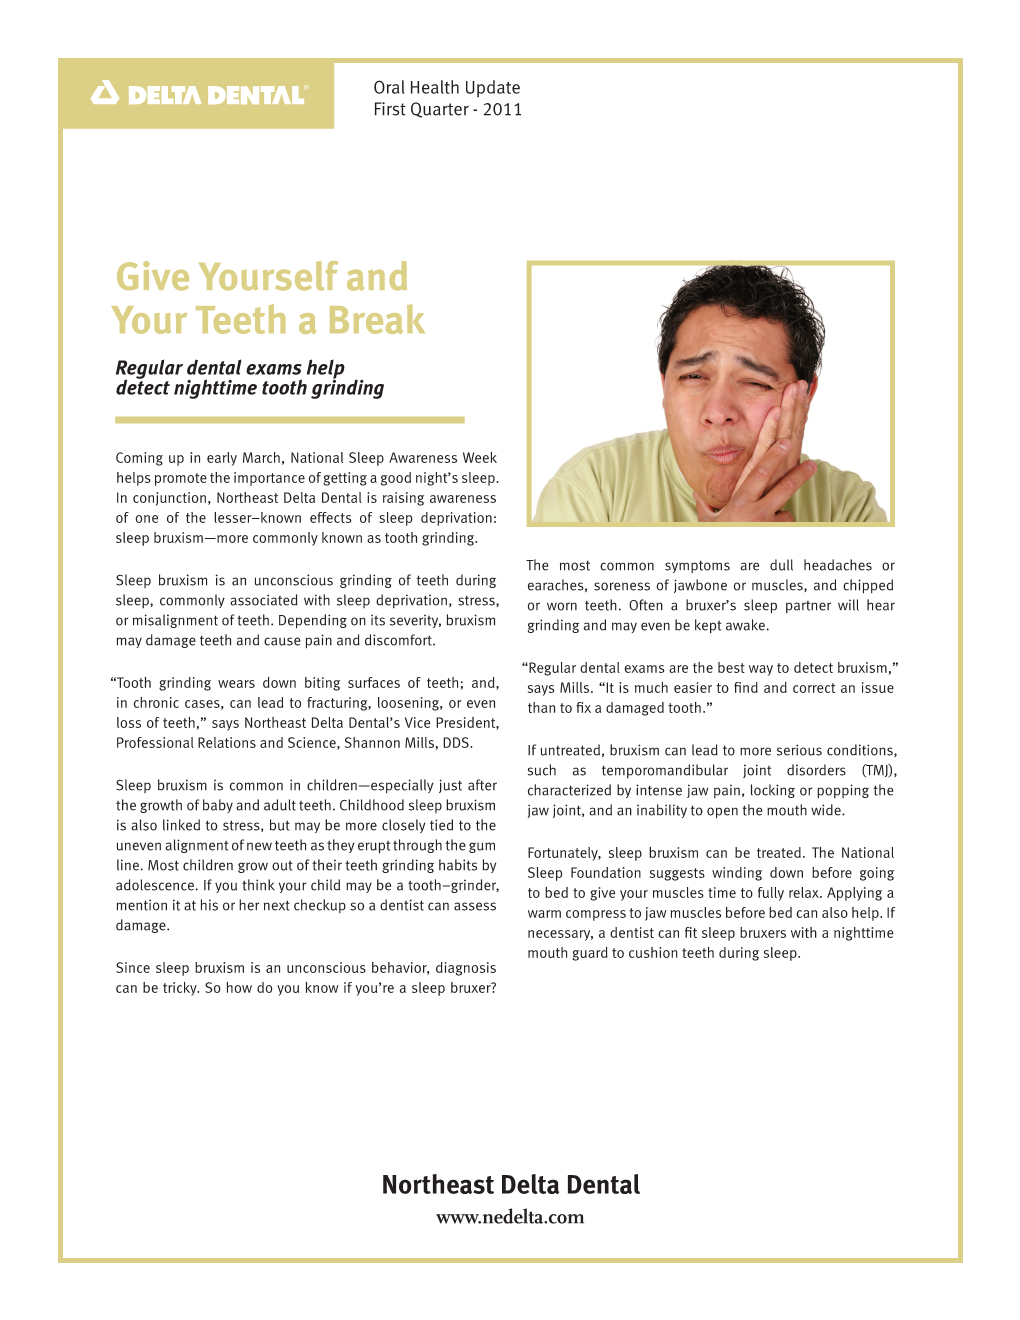 Give Yourself and Your Teeth a Break Regular Dental Exams Help Detect Nighttime Tooth Grinding